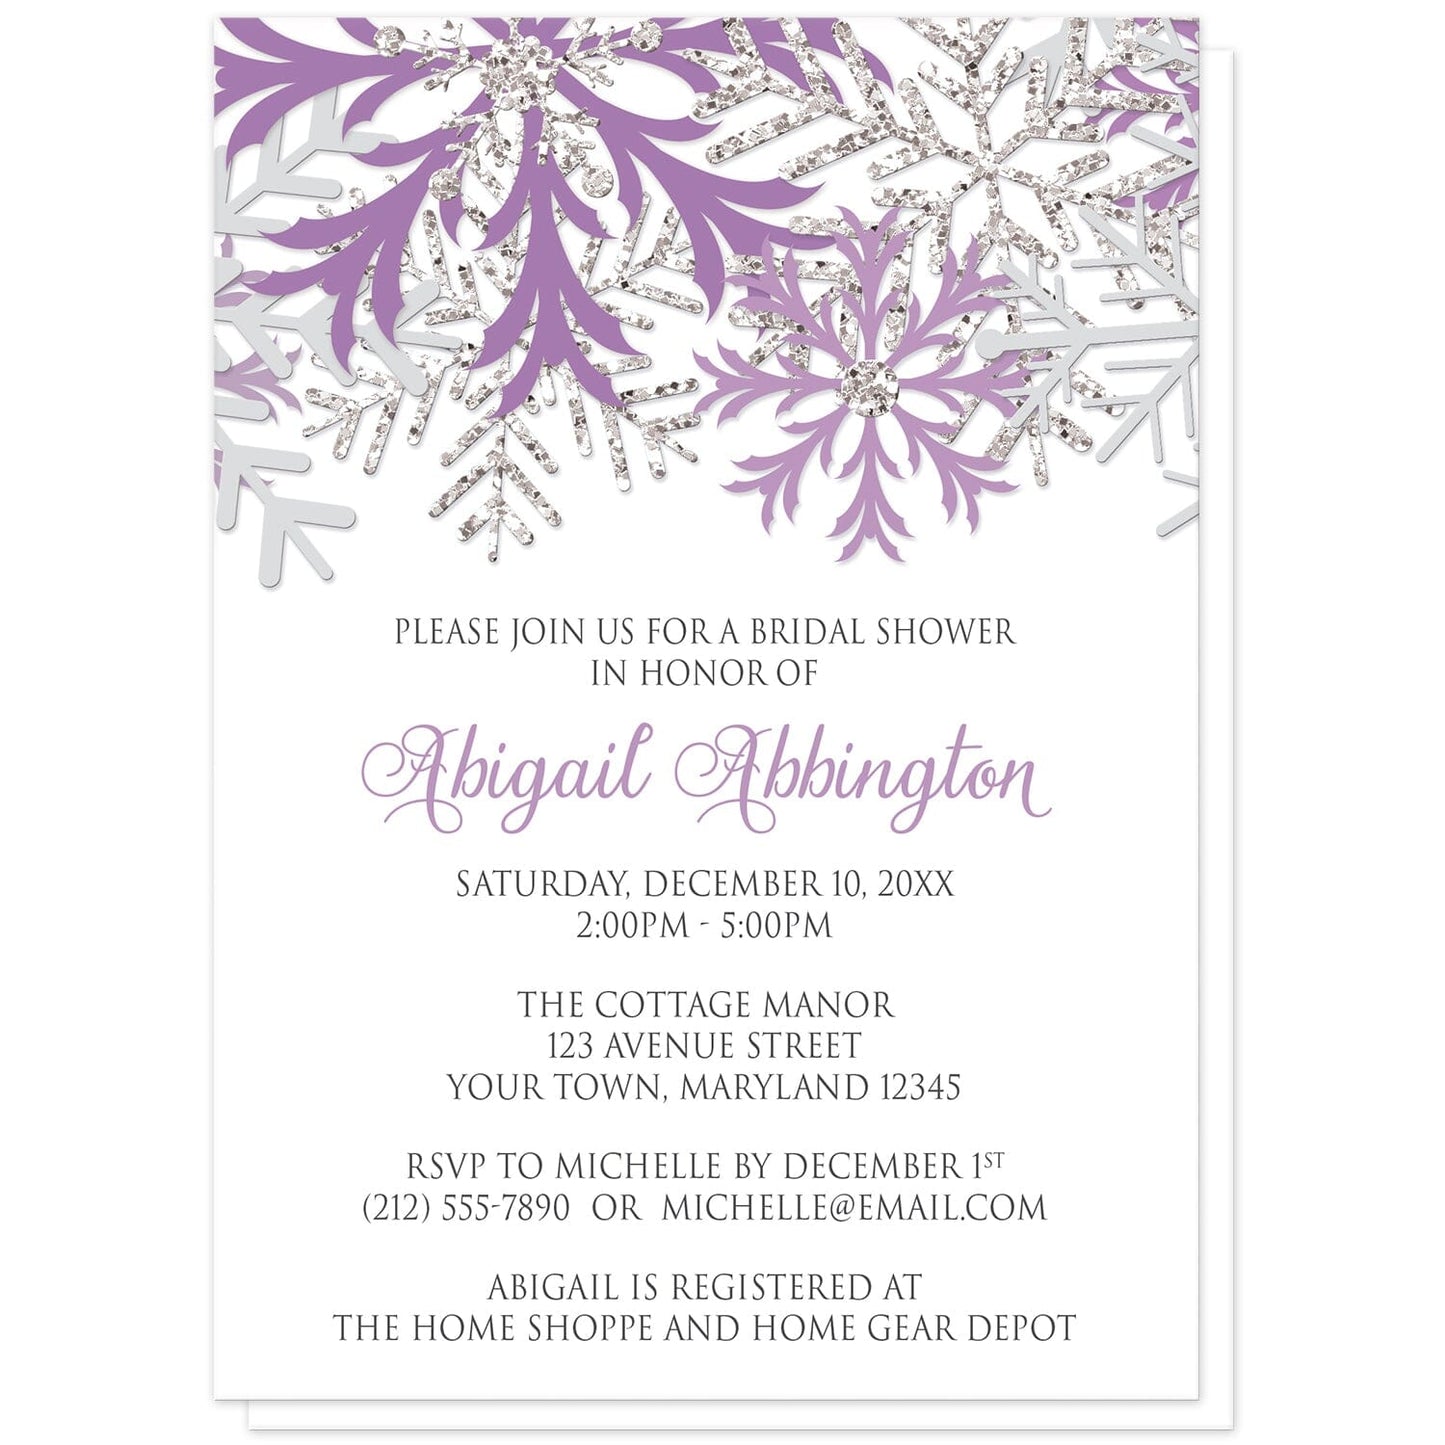 Winter Purple Silver Snowflake Bridal Shower Invitations at Artistically Invited. Beautiful winter purple silver snowflake bridal shower invitations designed with purple, light purple, silver-colored glitter-illustrated, and light gray snowflakes along the top over a white background. Your personalized bridal shower celebration details are custom printed in purple and gray below the pretty snowflakes.